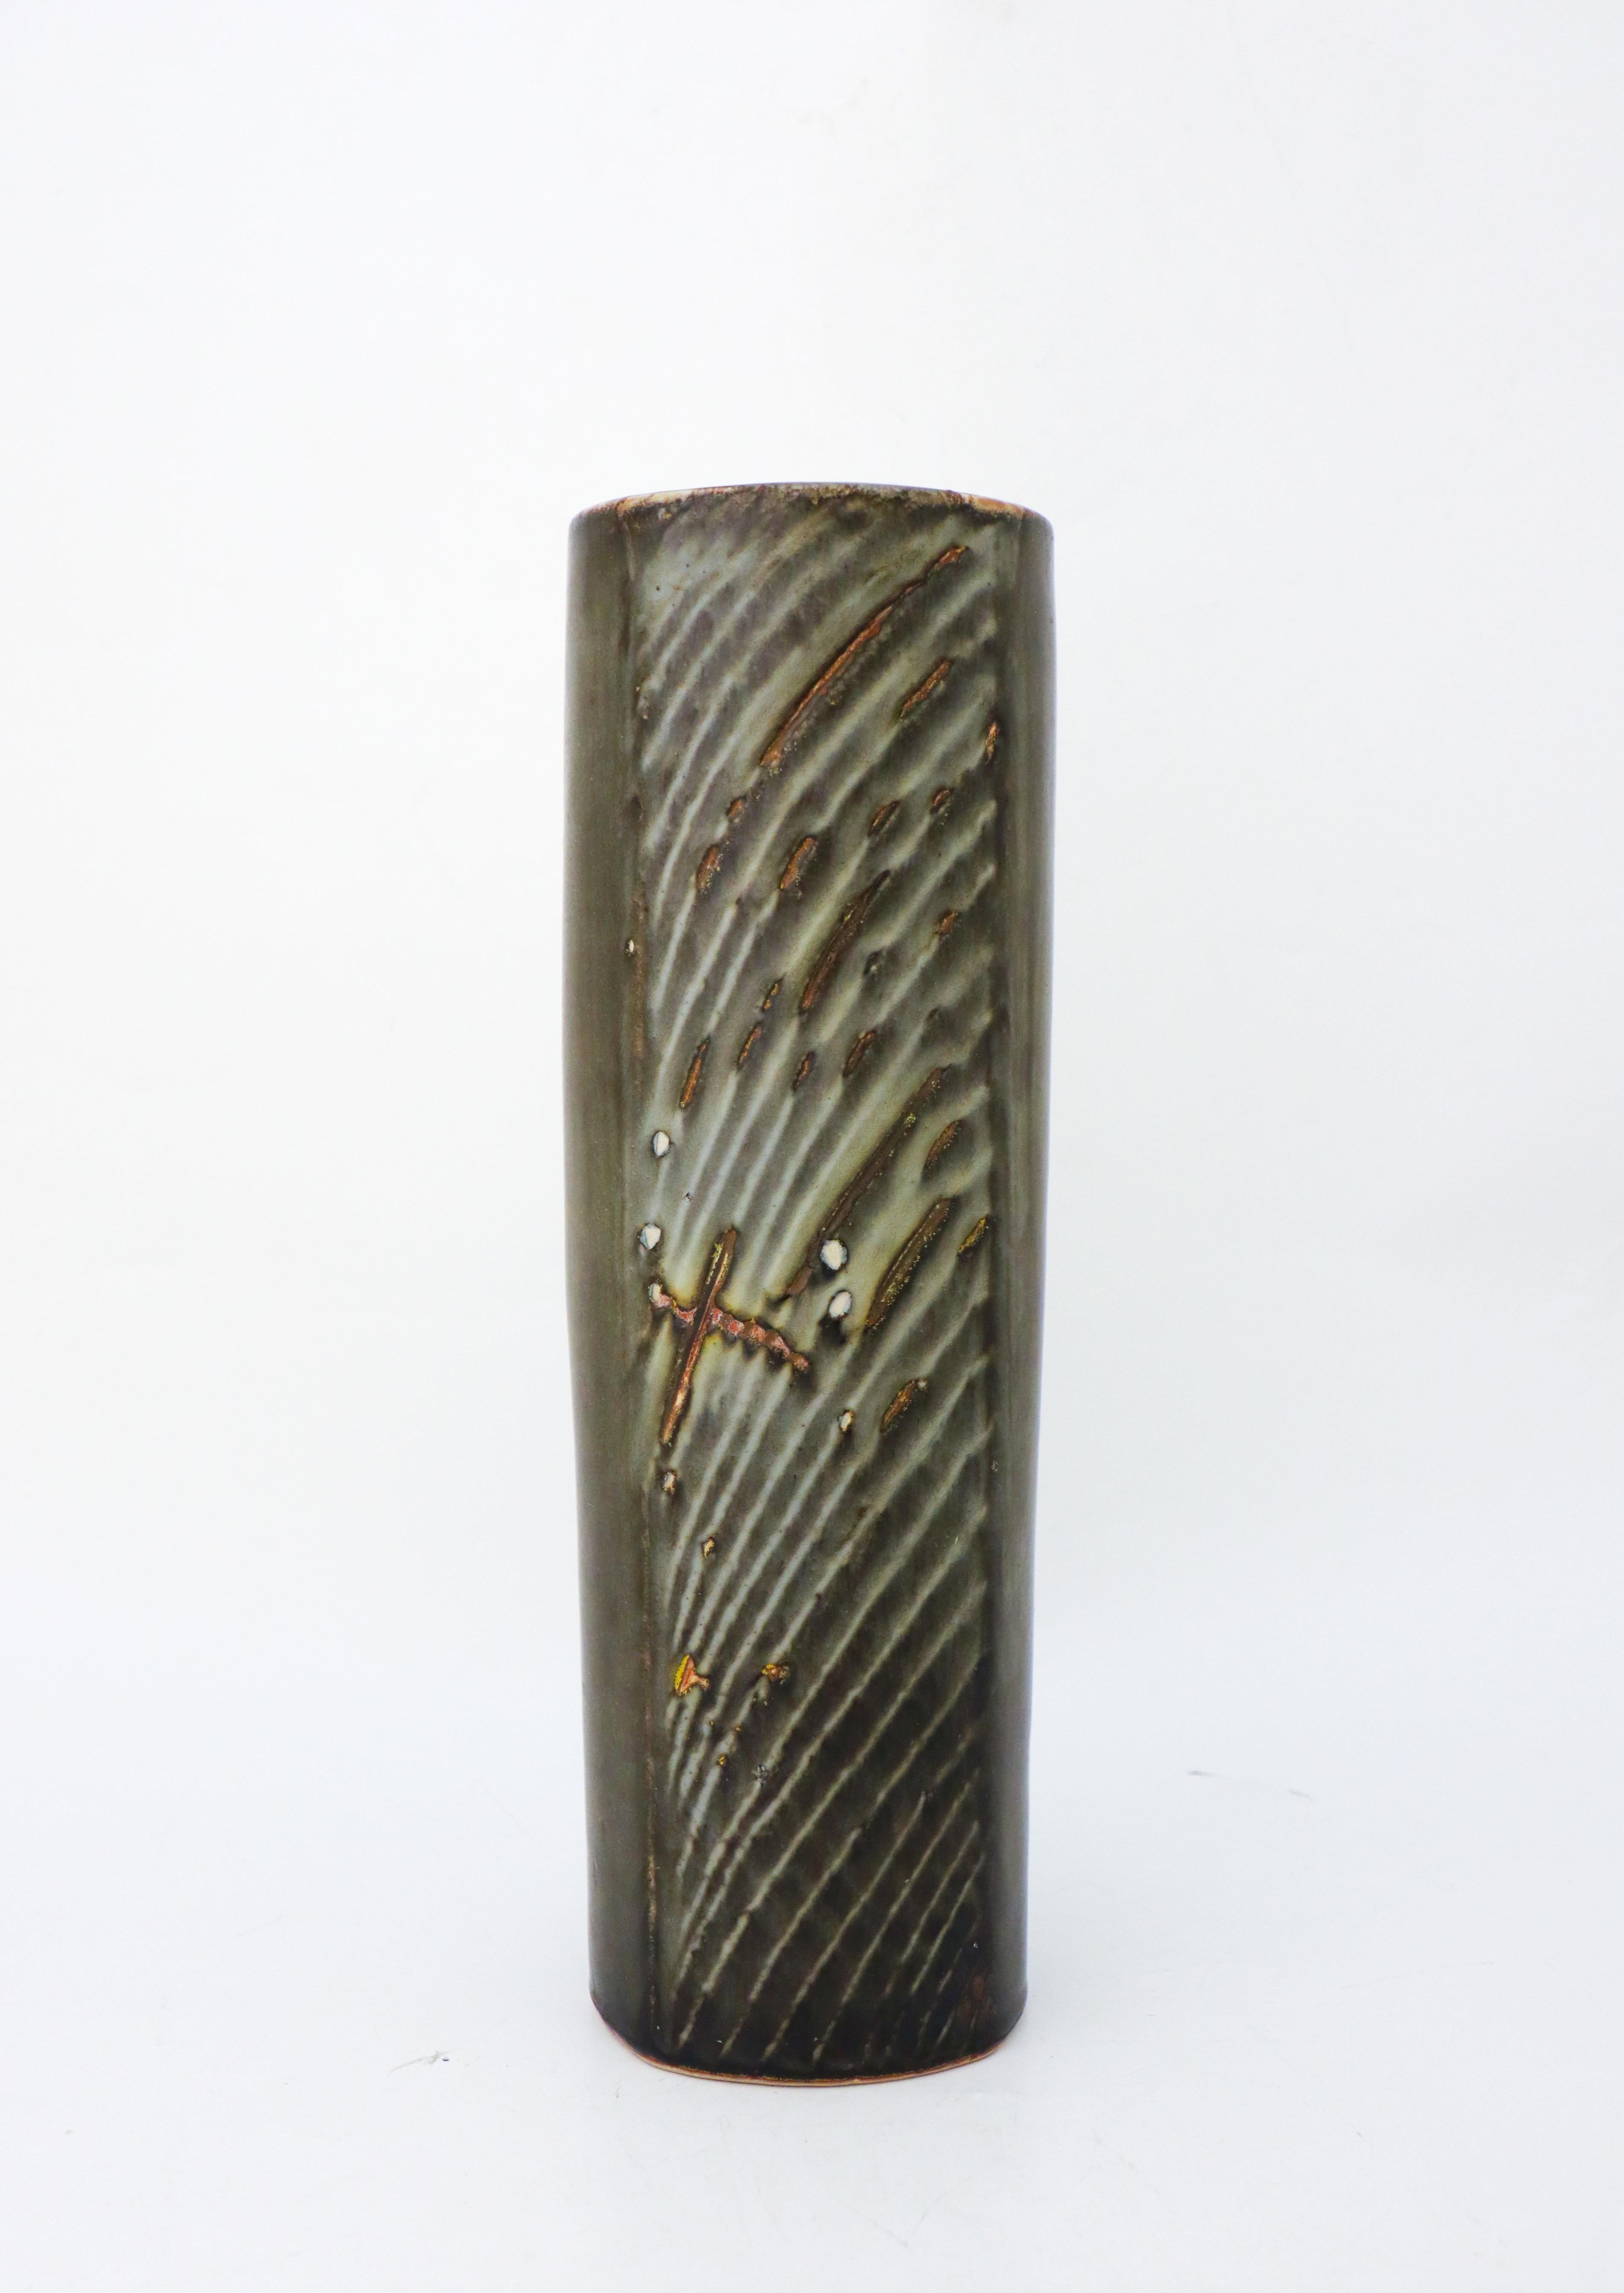 A large, gray cylindric vase designed by Carl-Harry Stålhane at Rörstrand Atelier, it´s 32,5 cm (13